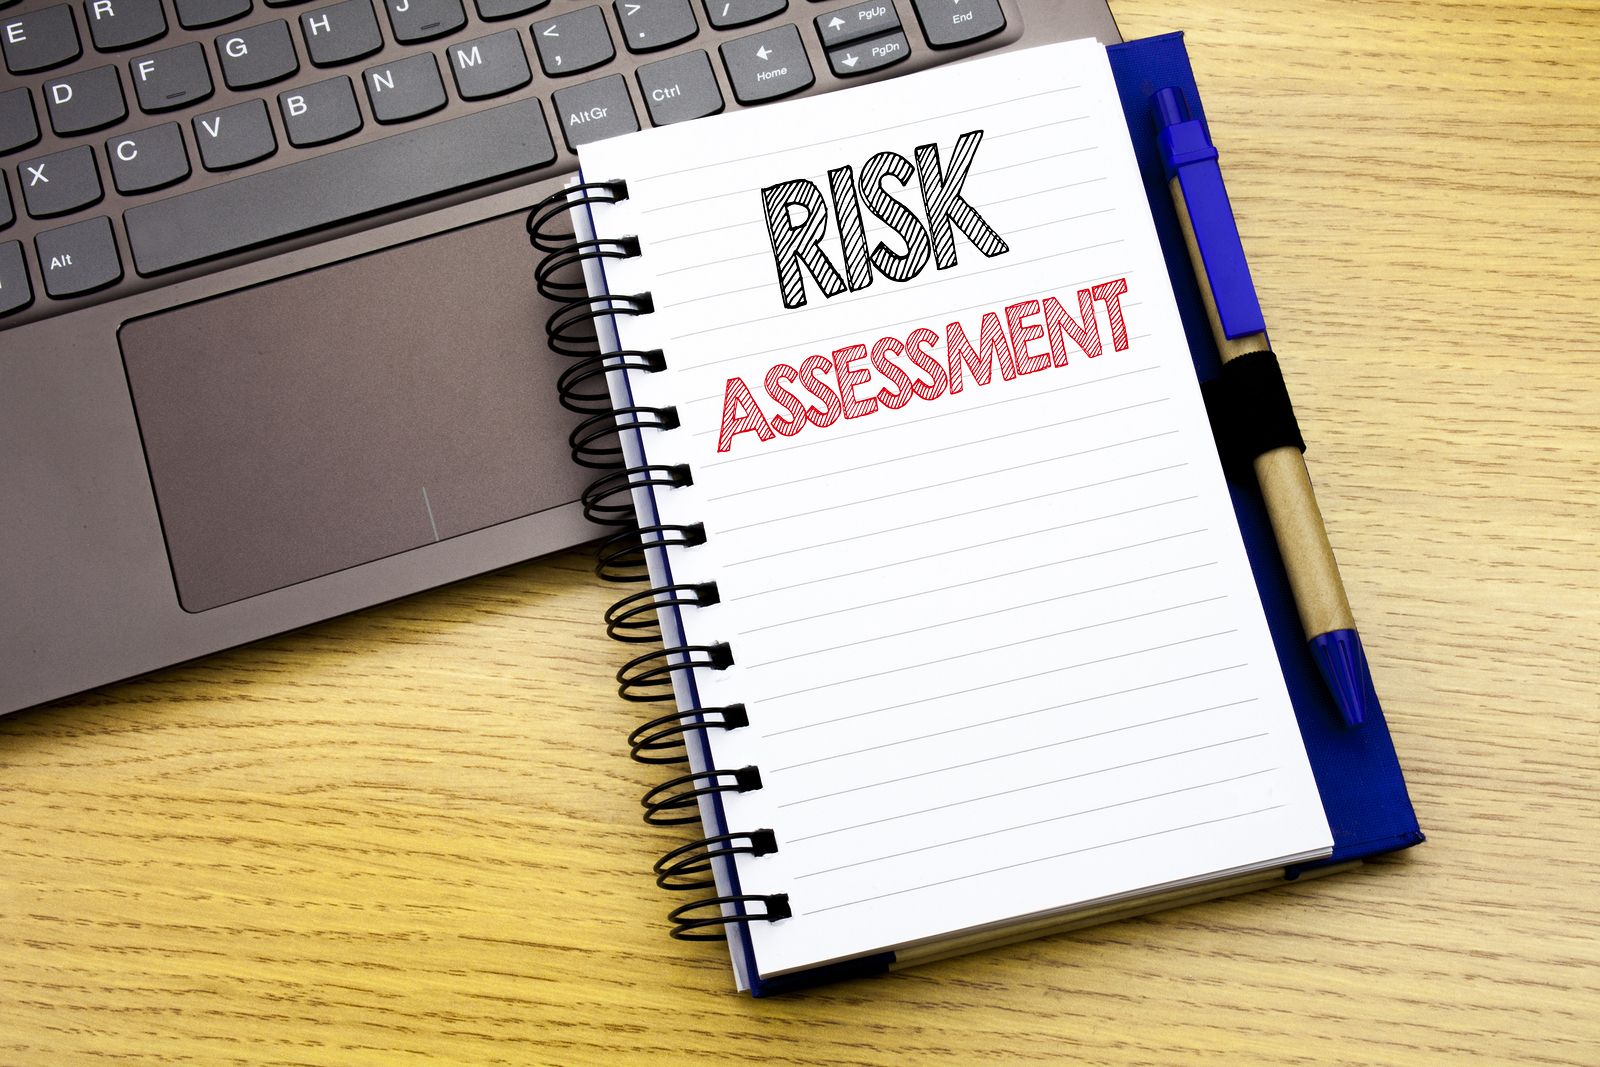 Unsure how to protect your SMB from cybersecurity threats? We explain how an SMB cybersecurity risk assessment helps and outline the most critical...